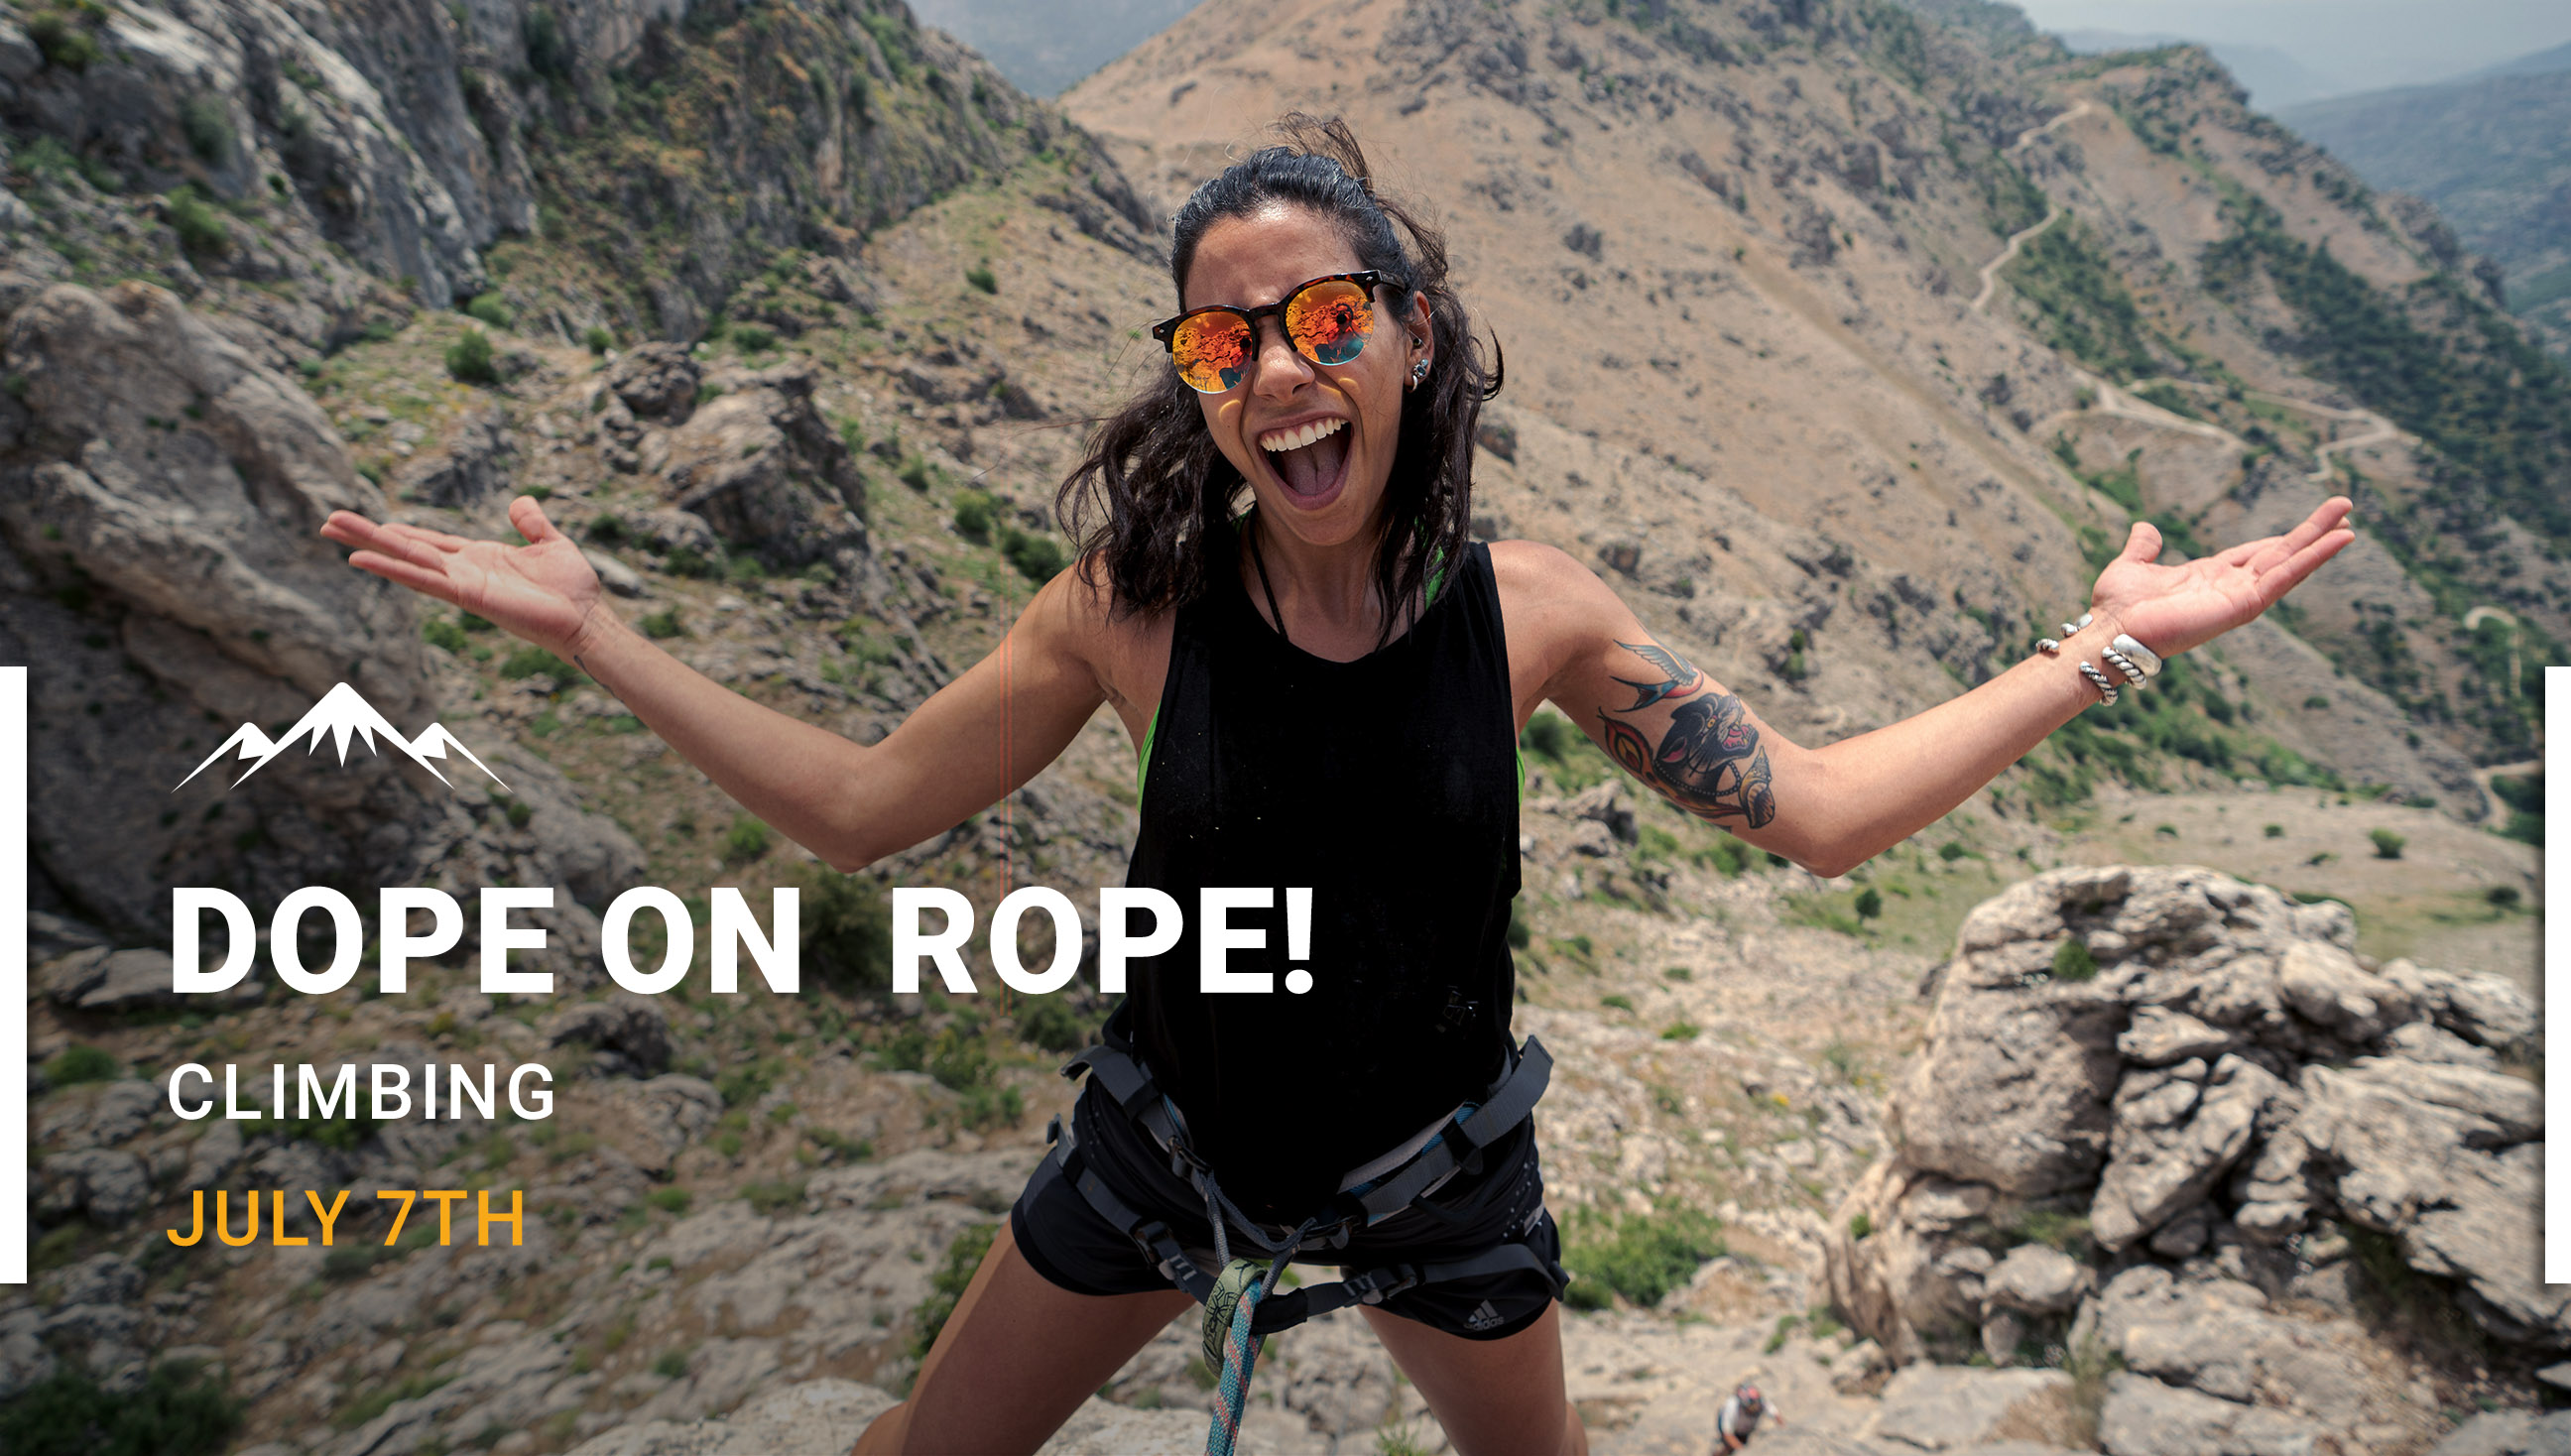 Dope on Rope!